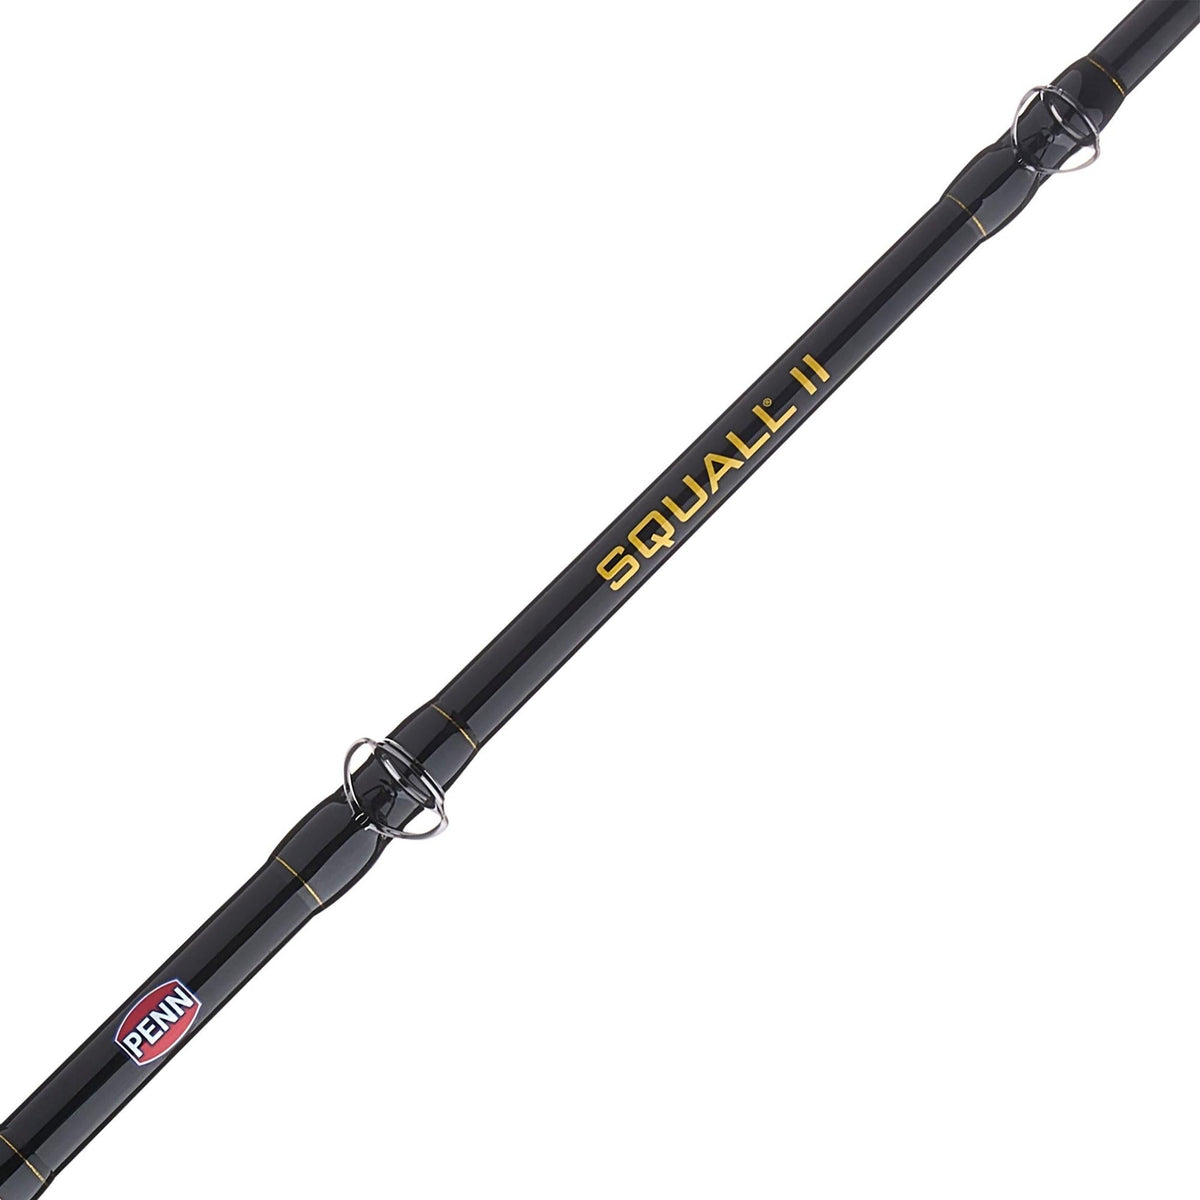 Penn Squall II 50 Lever Drag with 6FT6IN Medium Heavy Rod Combo